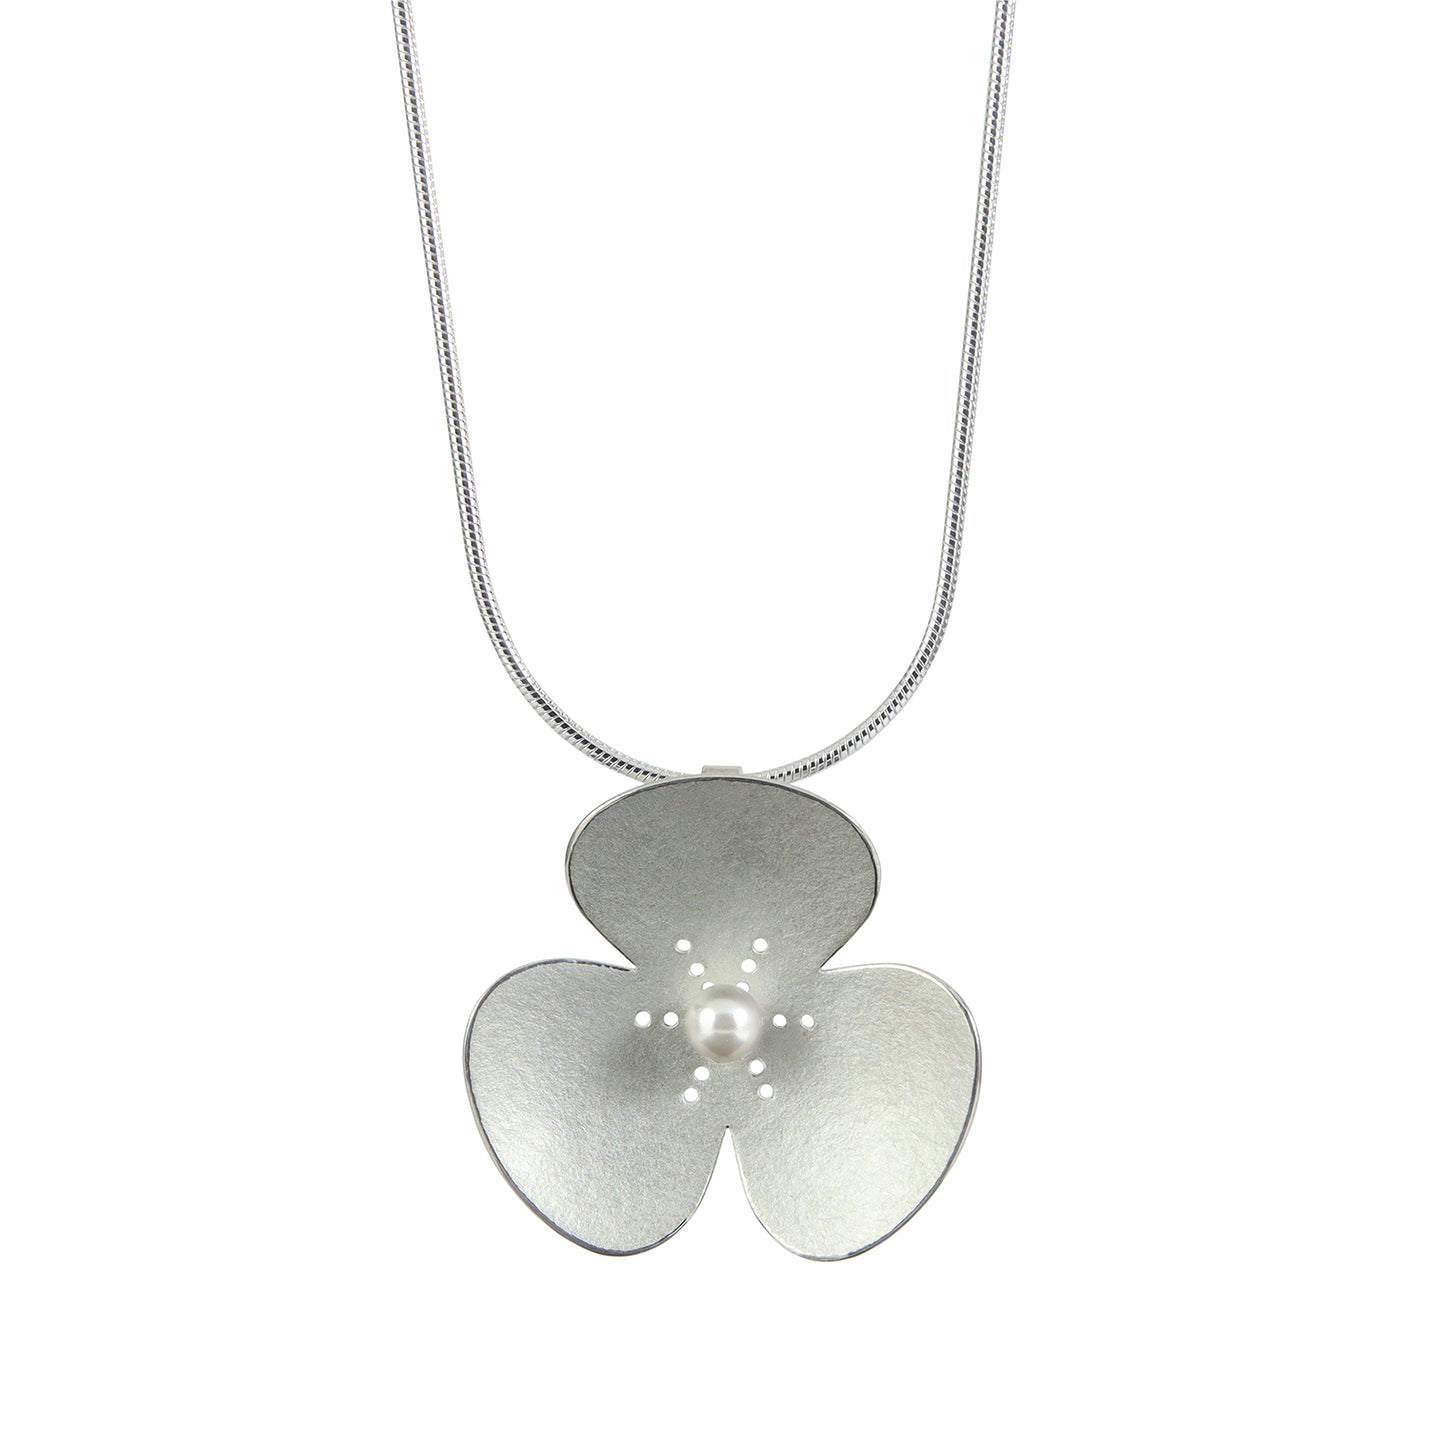 Single Silver and Pearl Poppy hairpin, which becomes a pendant